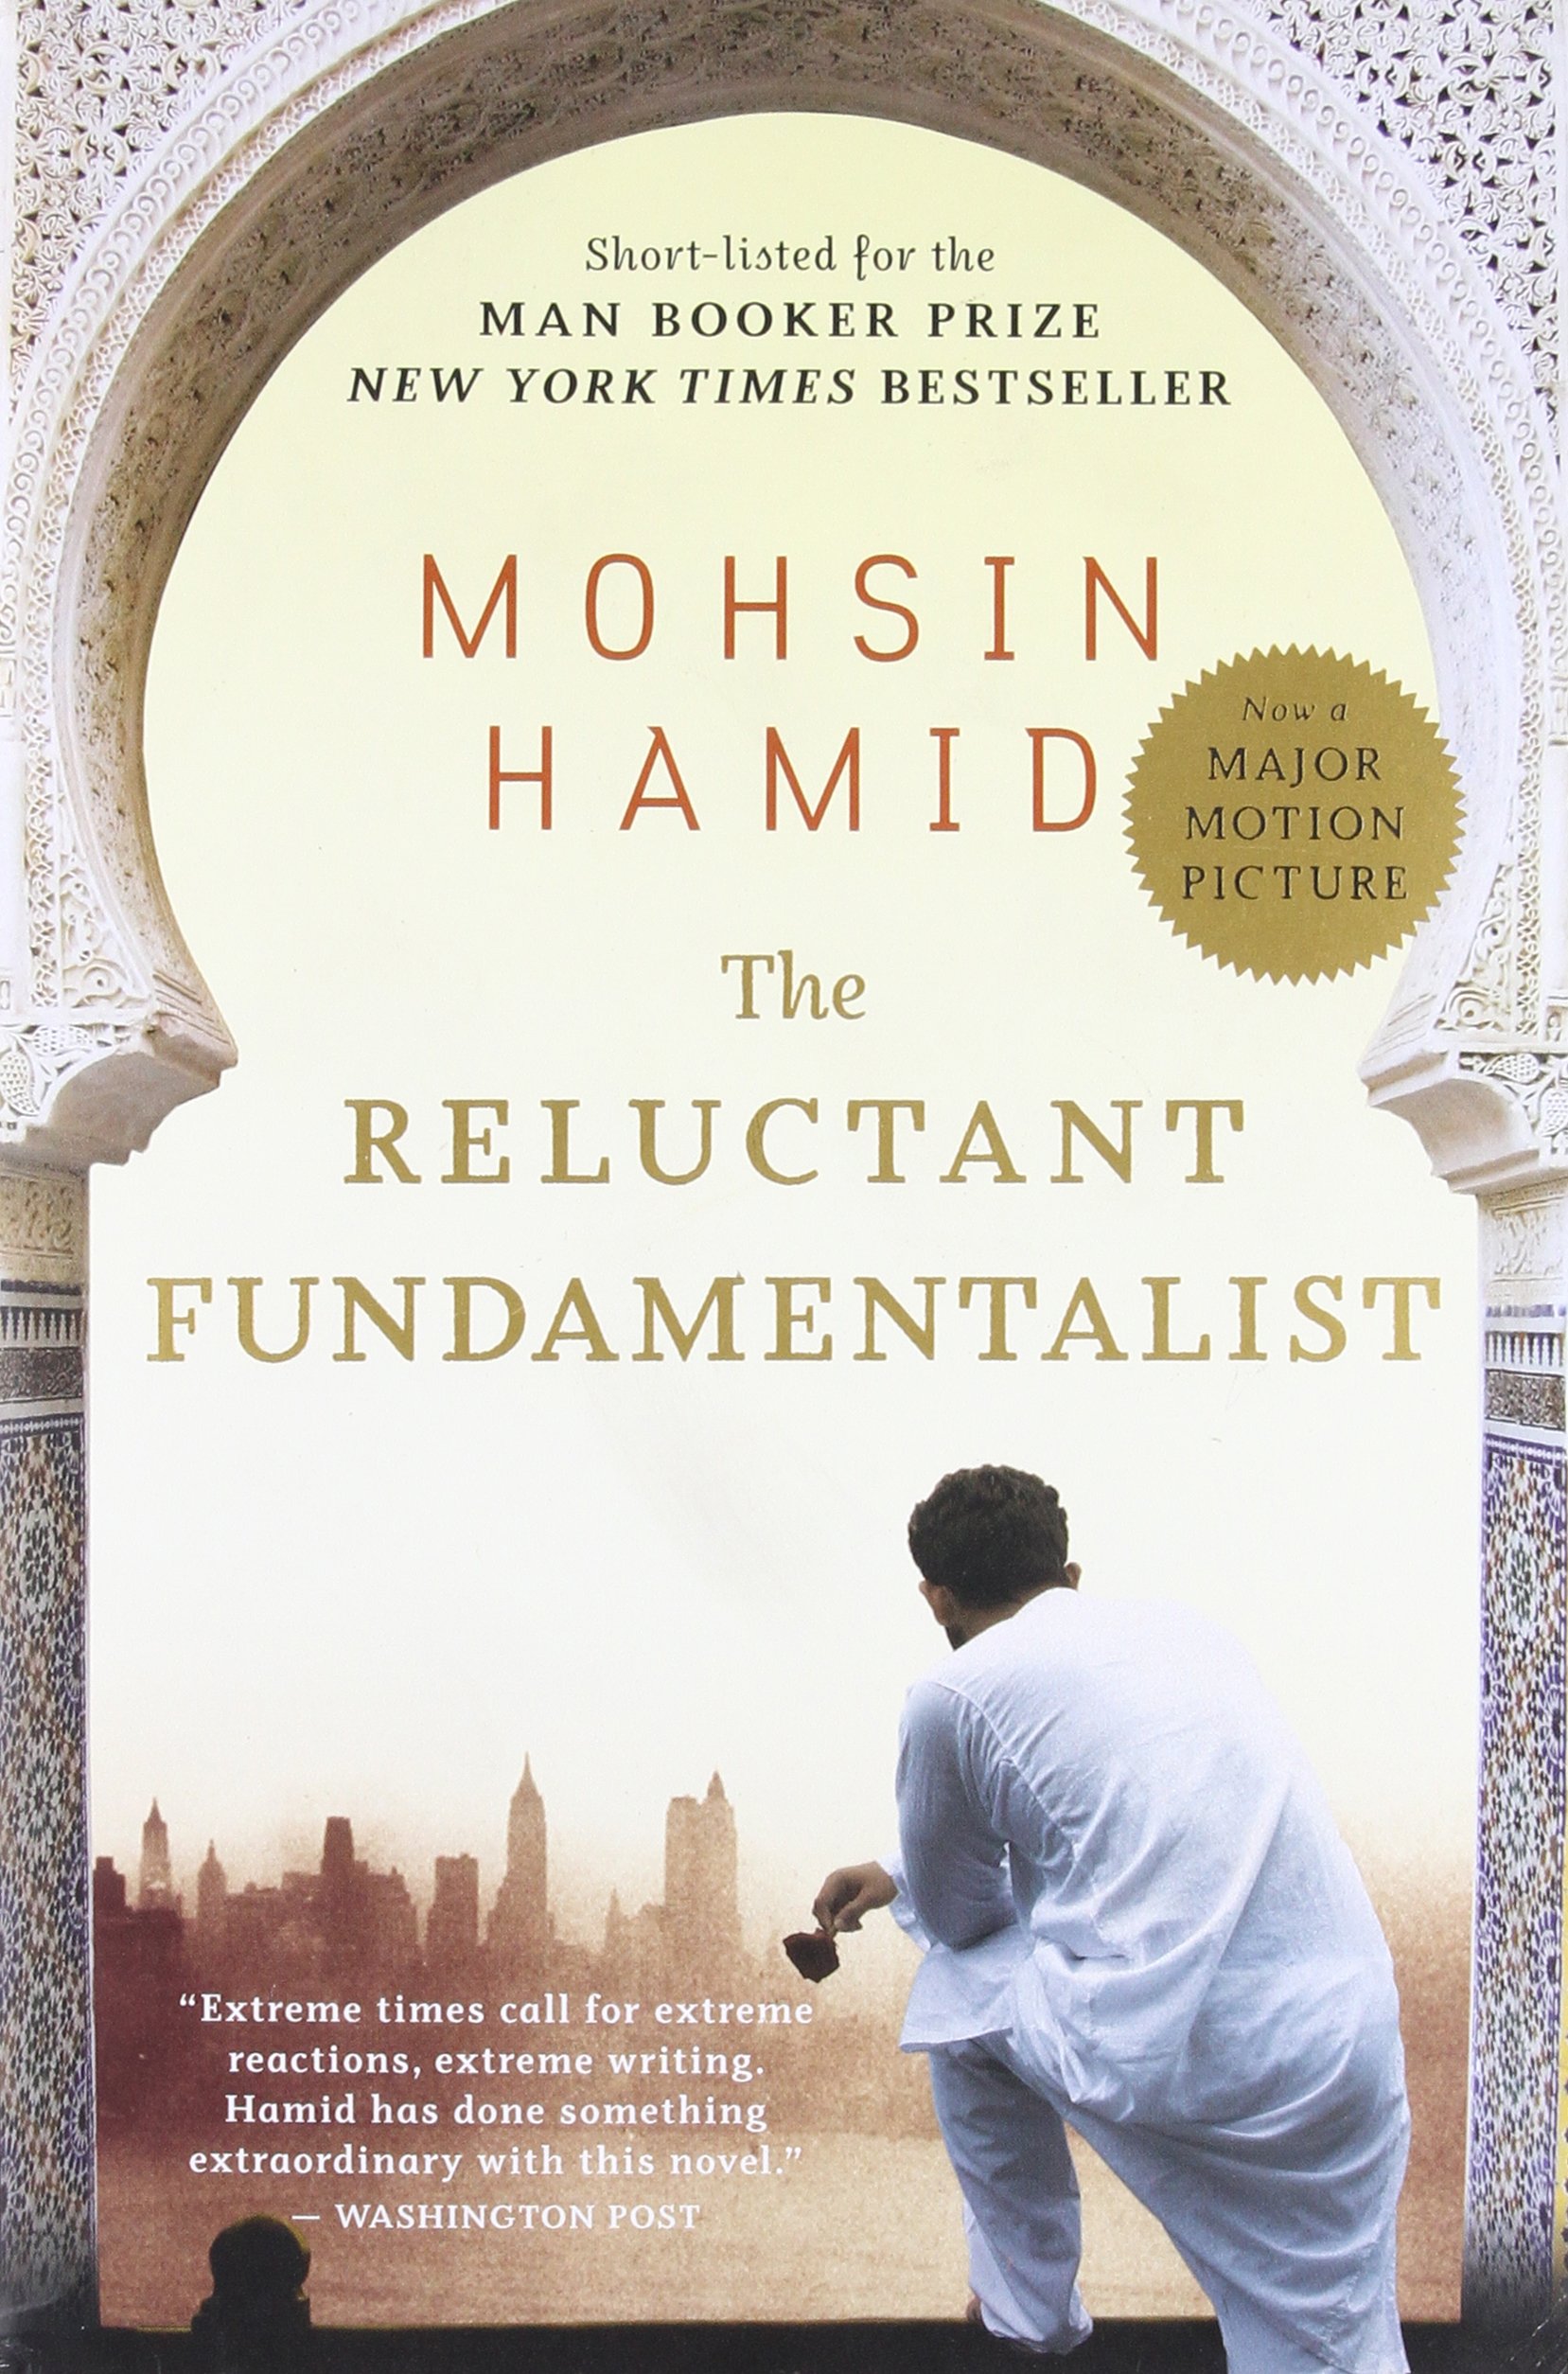 Cover art for the book "The Reluctant Fundamentalist"